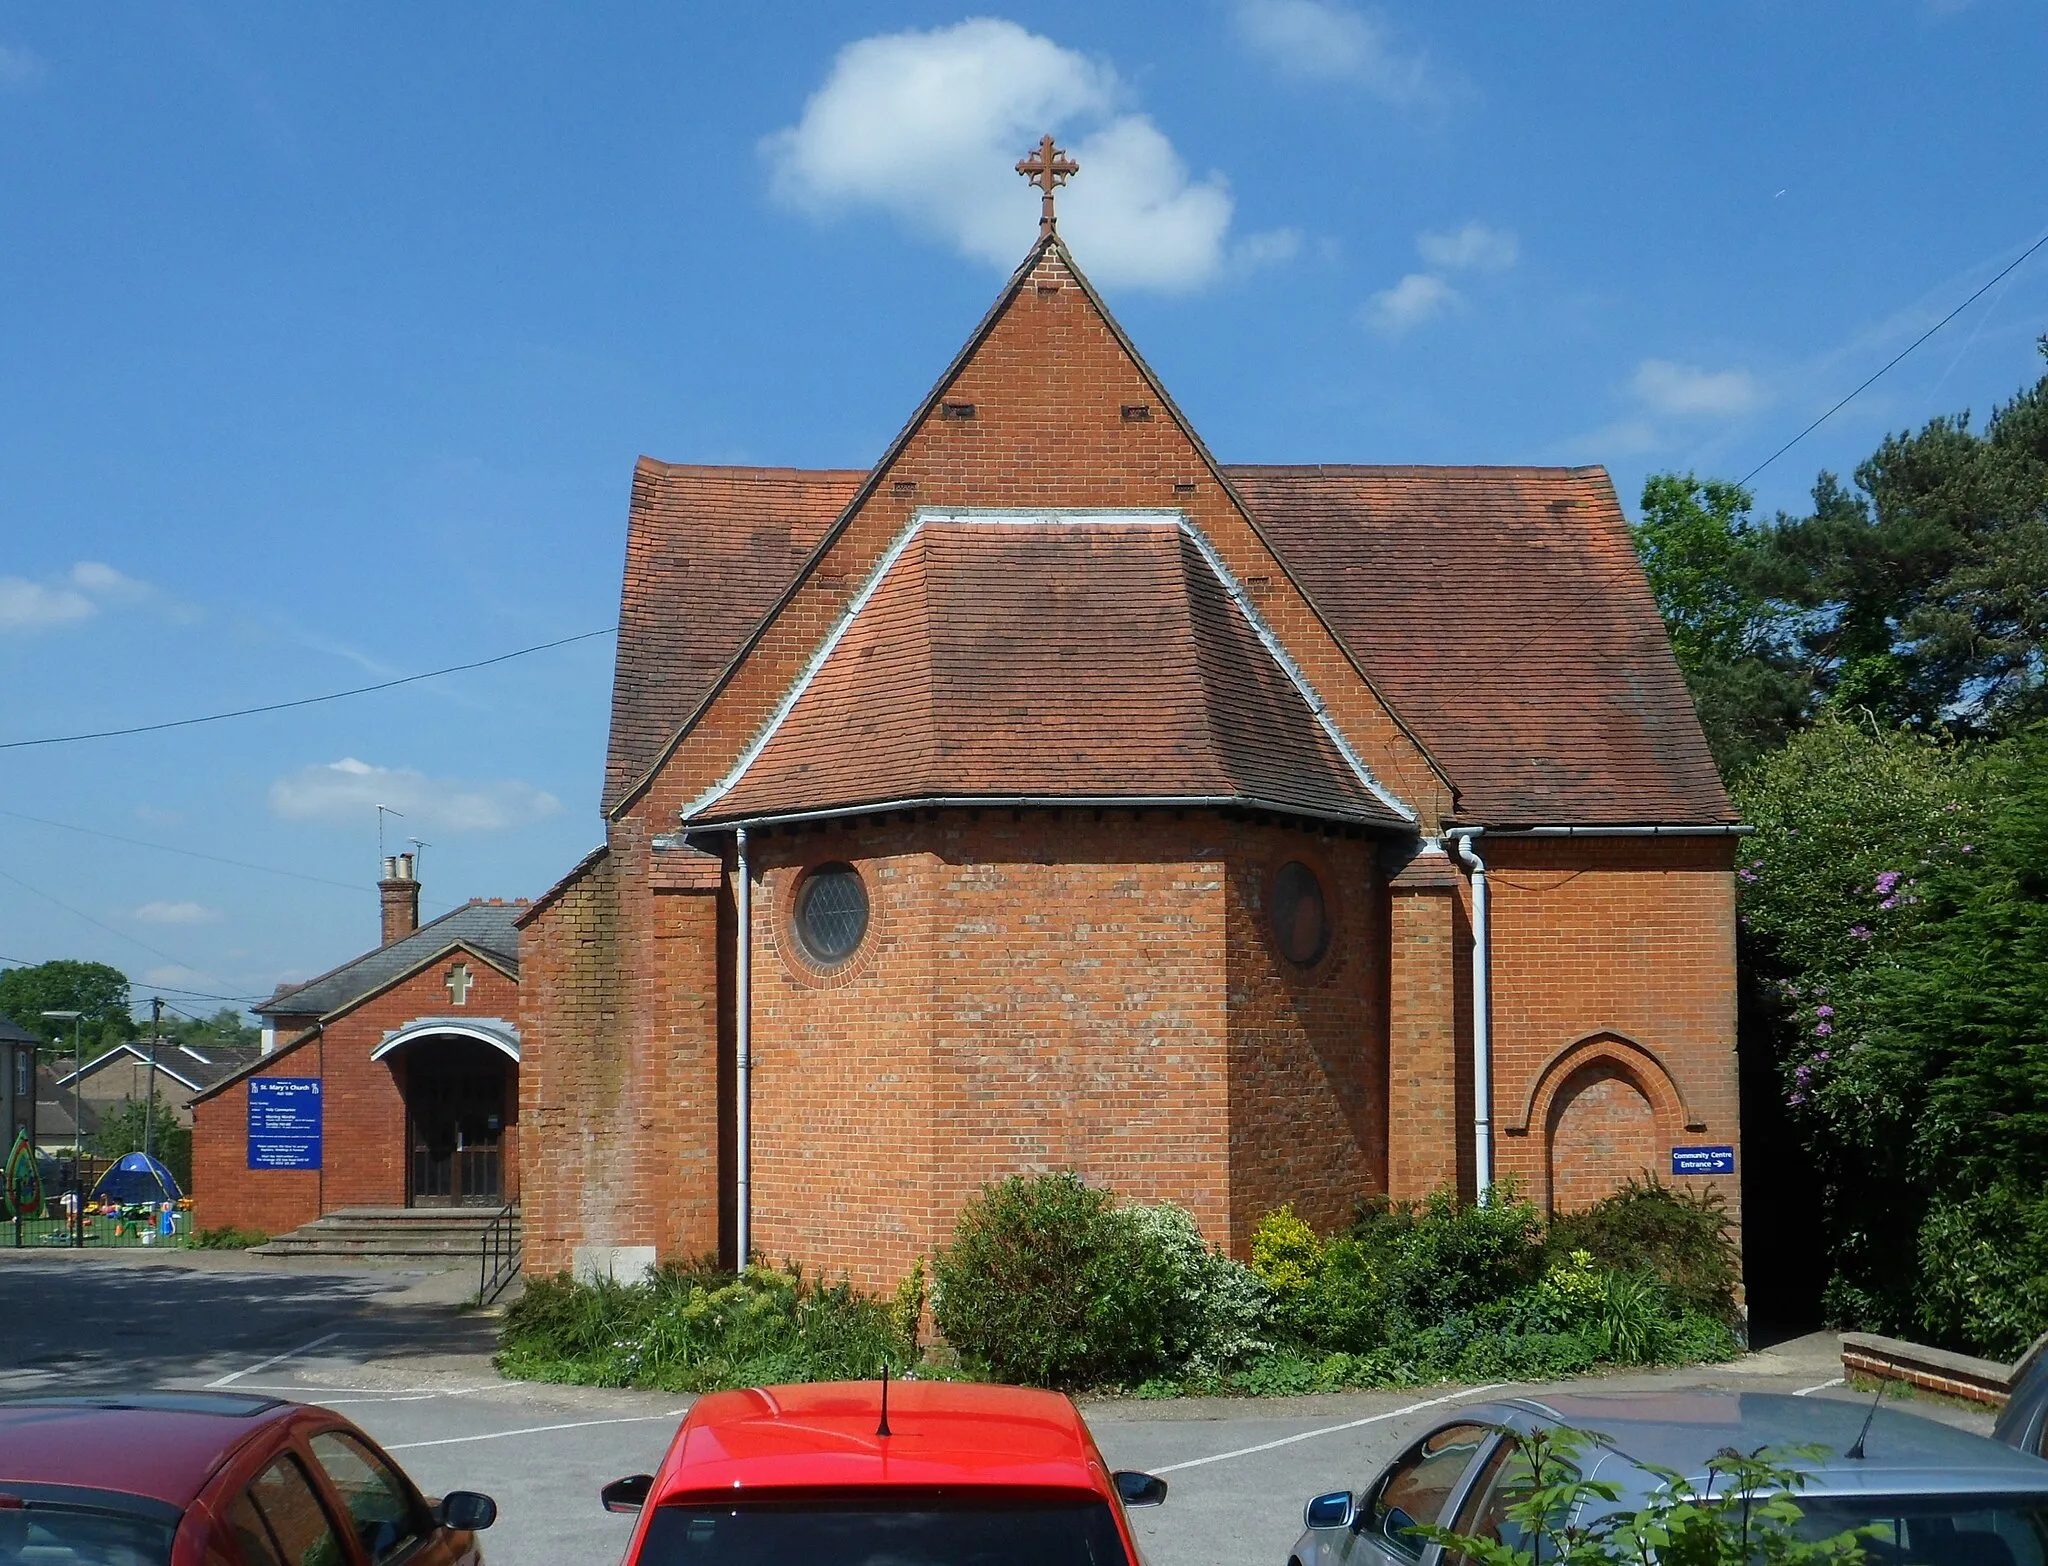 Photo showing: St Mary's Church, Wood Street, Ash Vale, Borough of Guildford, Surrey, England.